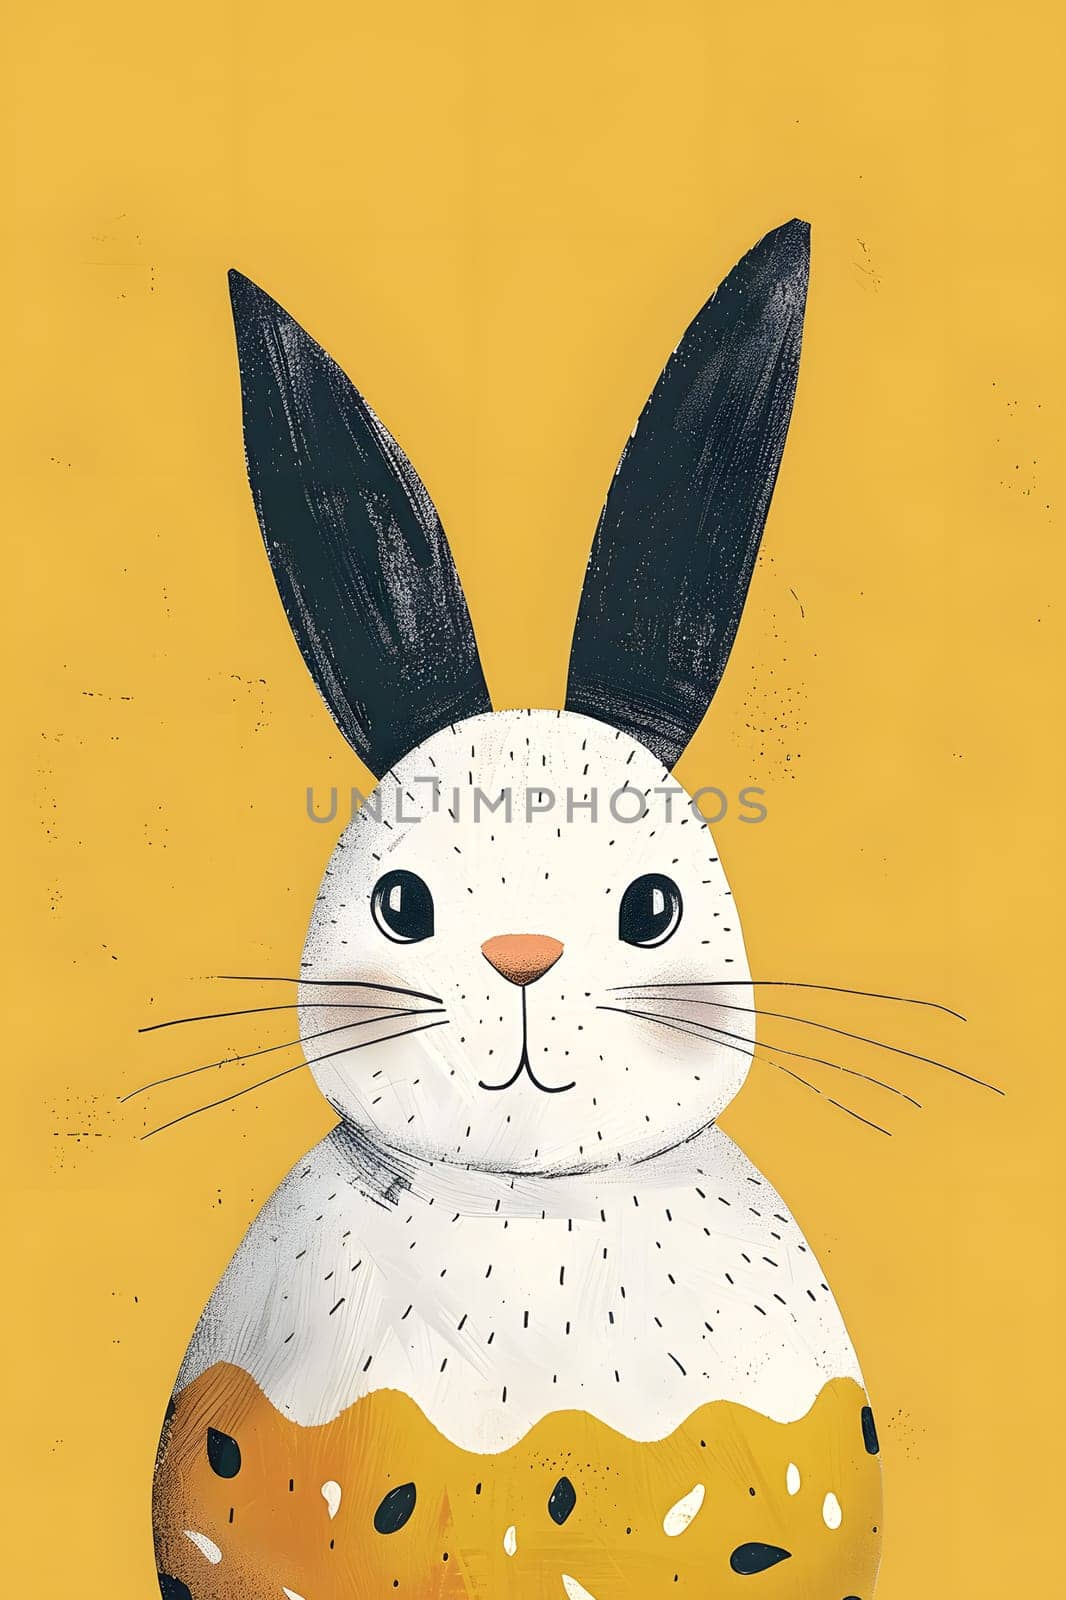 A Domestic rabbit with black ears is depicted sitting on a yellow background. This Animal figure resembles a Toy or an Illustration in an Art style